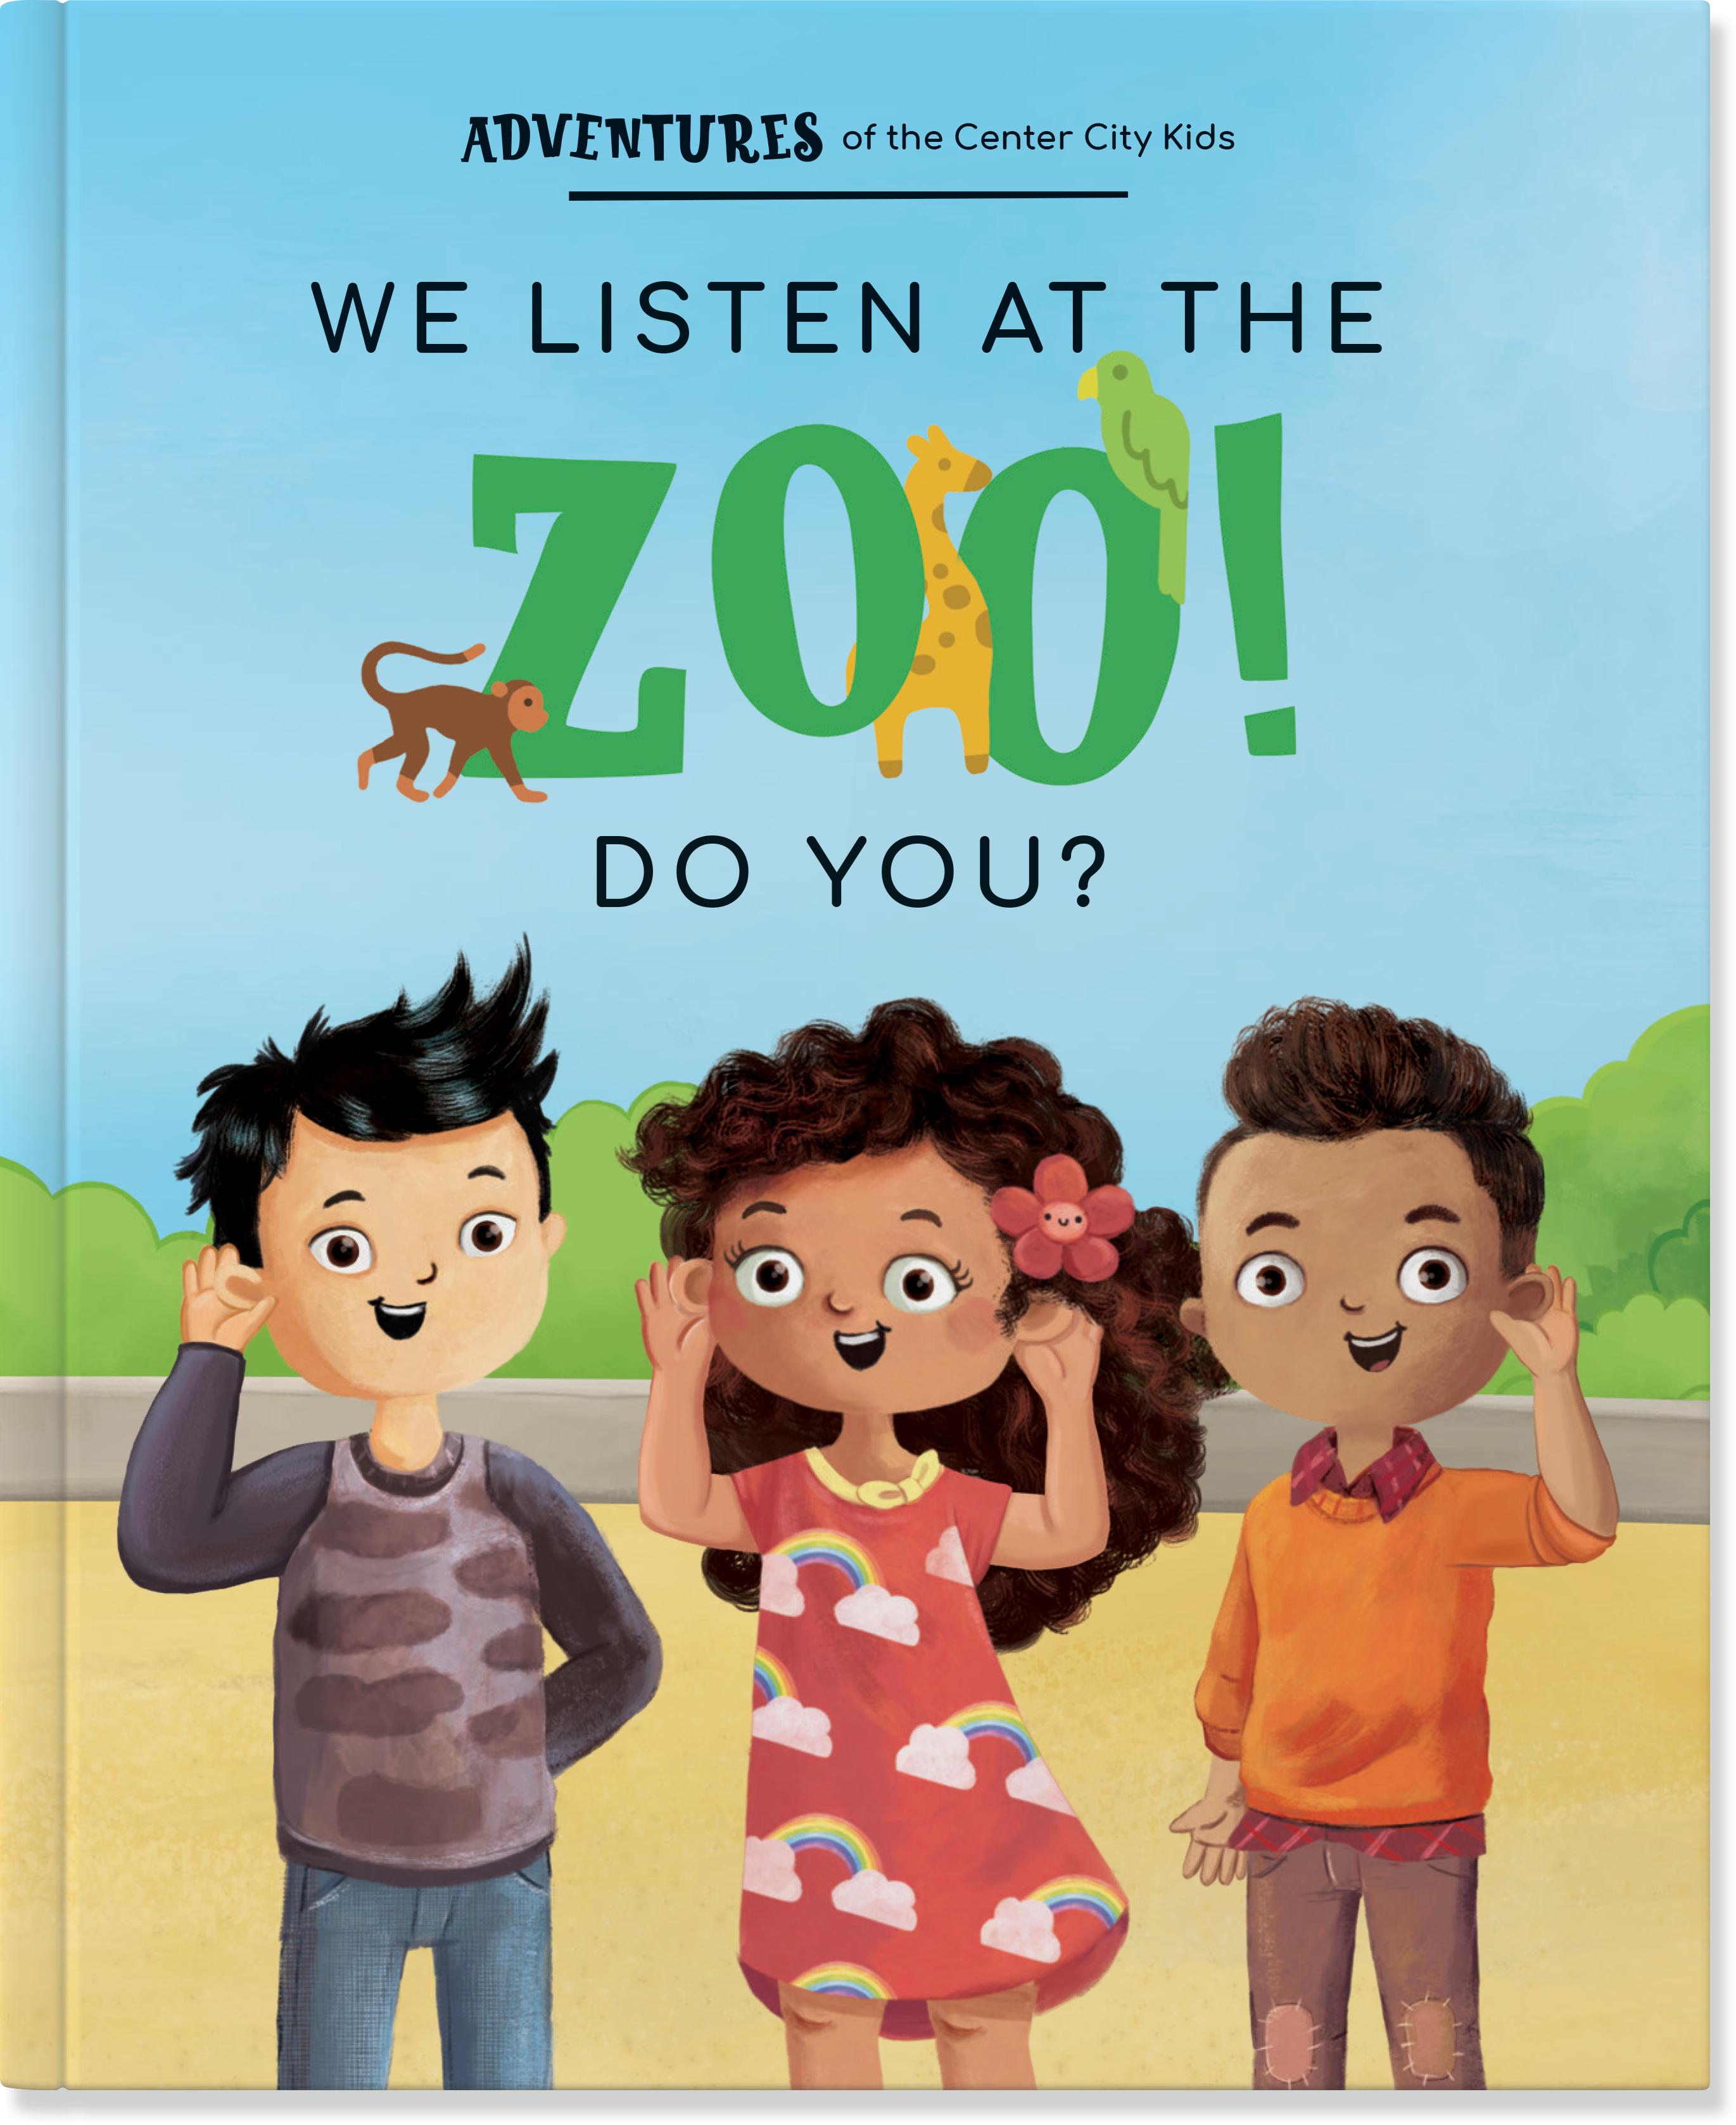 We Listen At The Zoo! Do you?